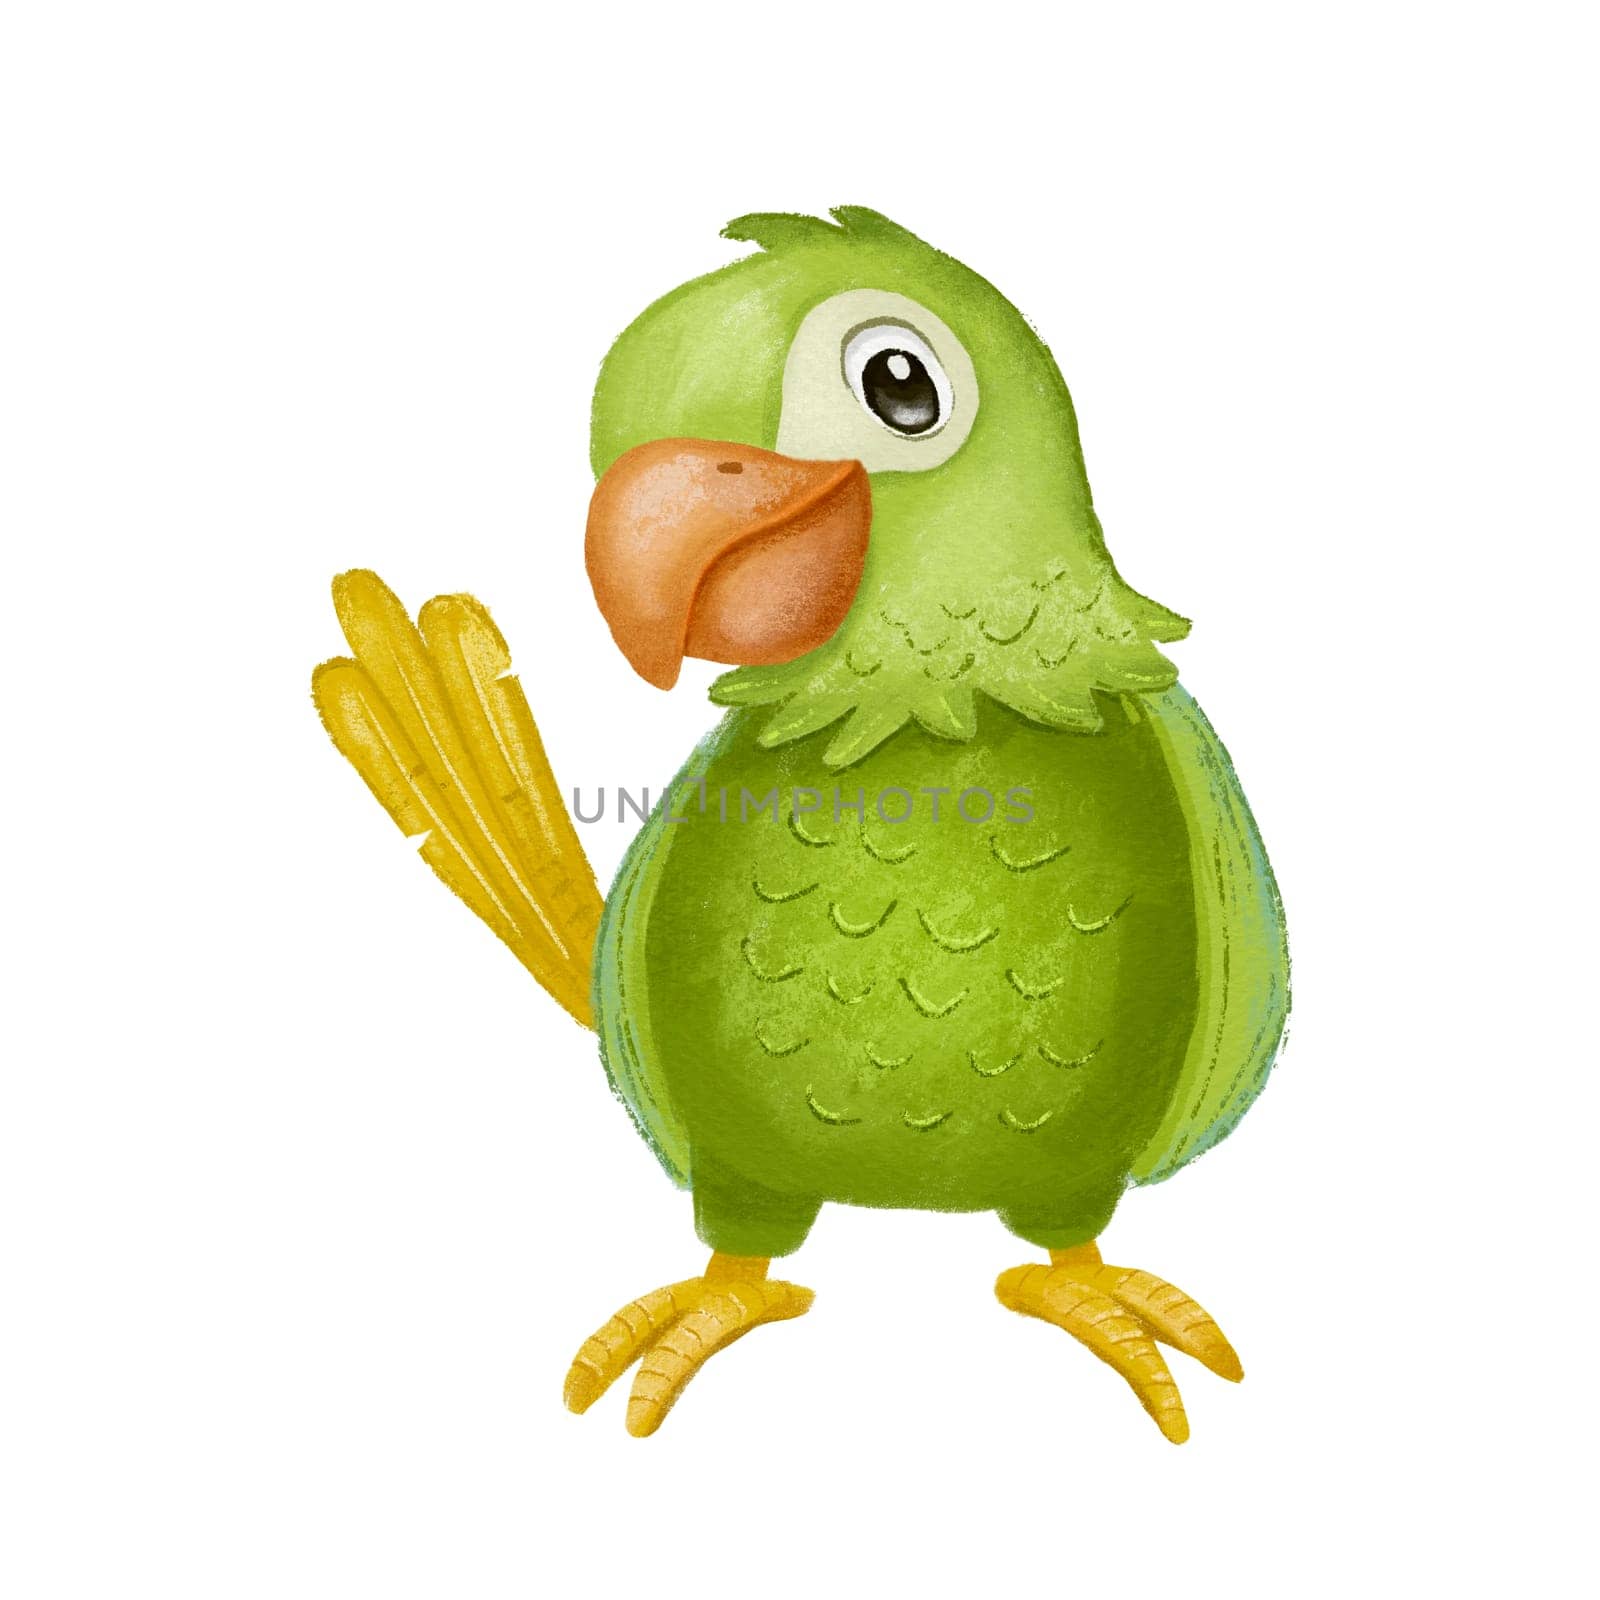 Green parrot bird. Hand drawn cartoon character isolated on white.